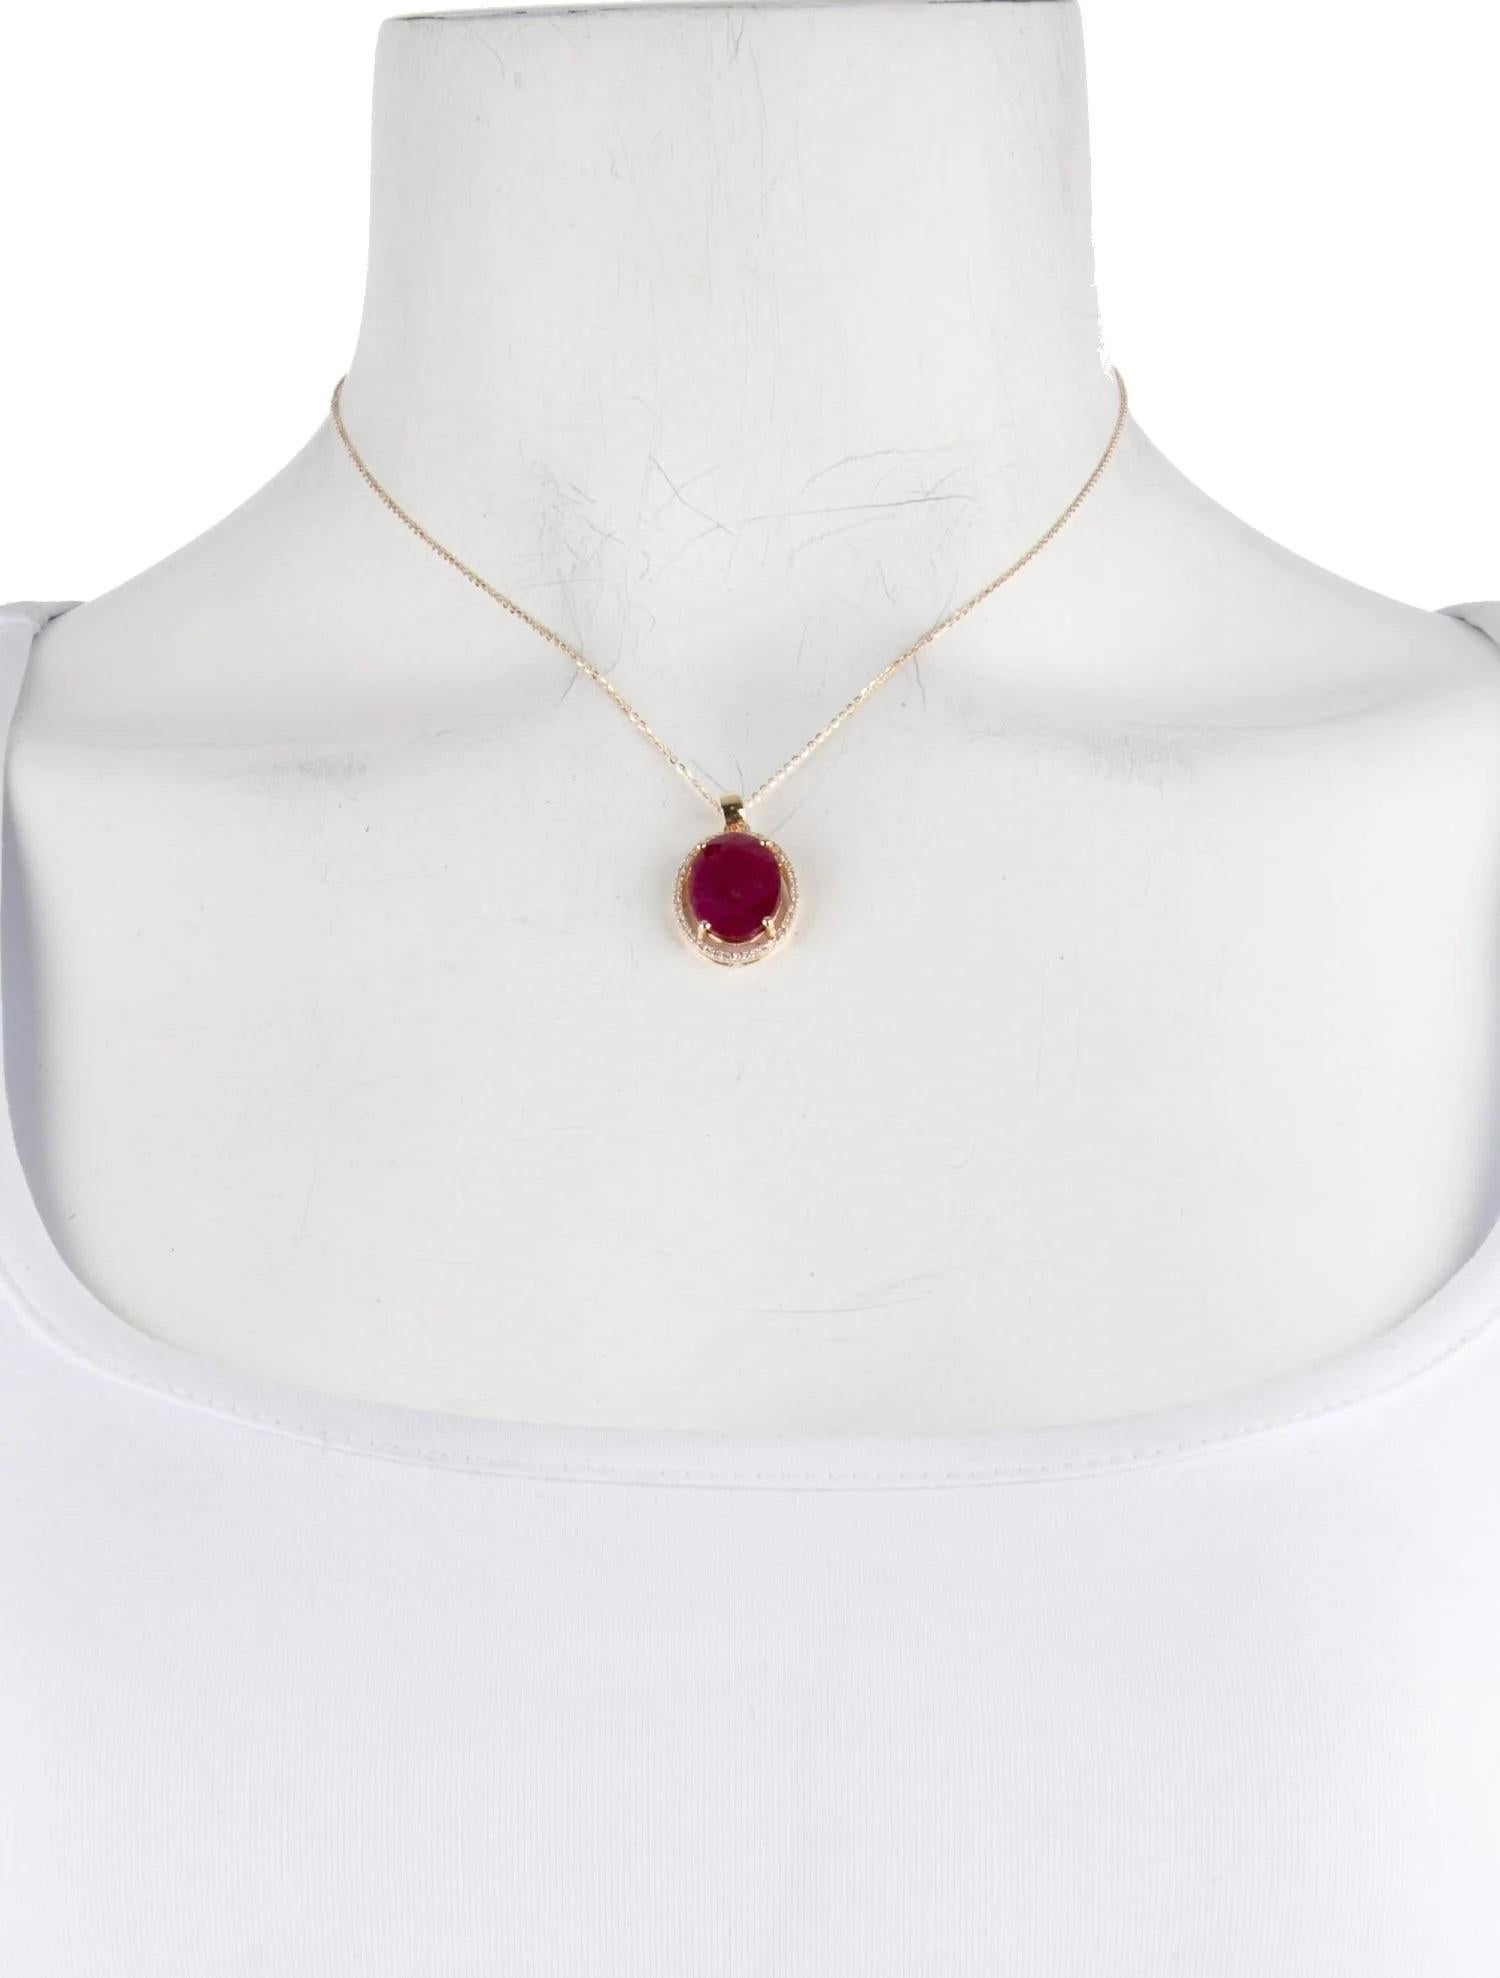 Artist 14K Ruby & Diamond Pendant Necklace  Faceted Oval Ruby  5.42ct  Yellow Gold For Sale